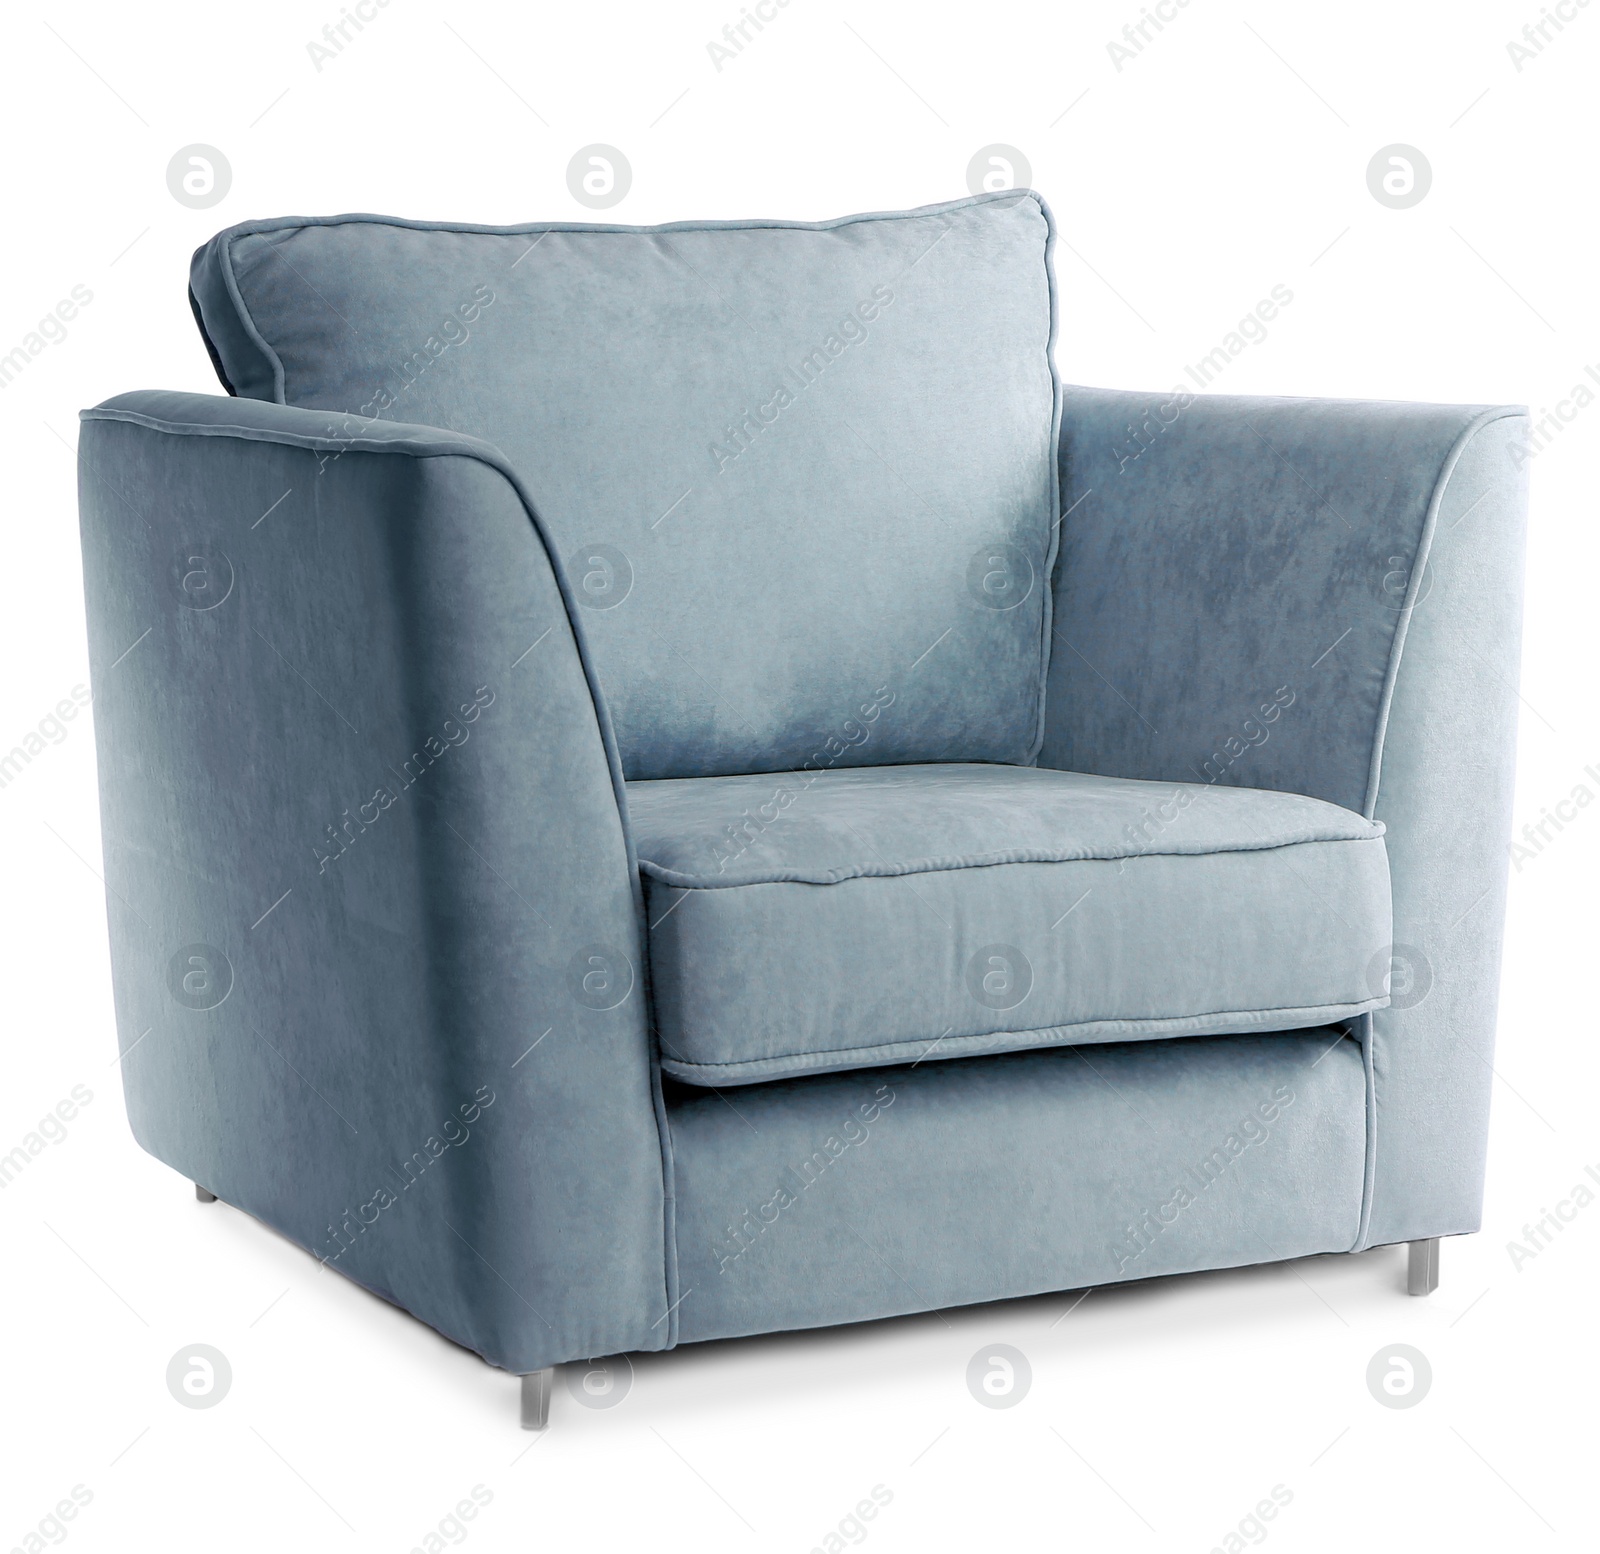 Image of One comfortable blue gray armchair isolated on white